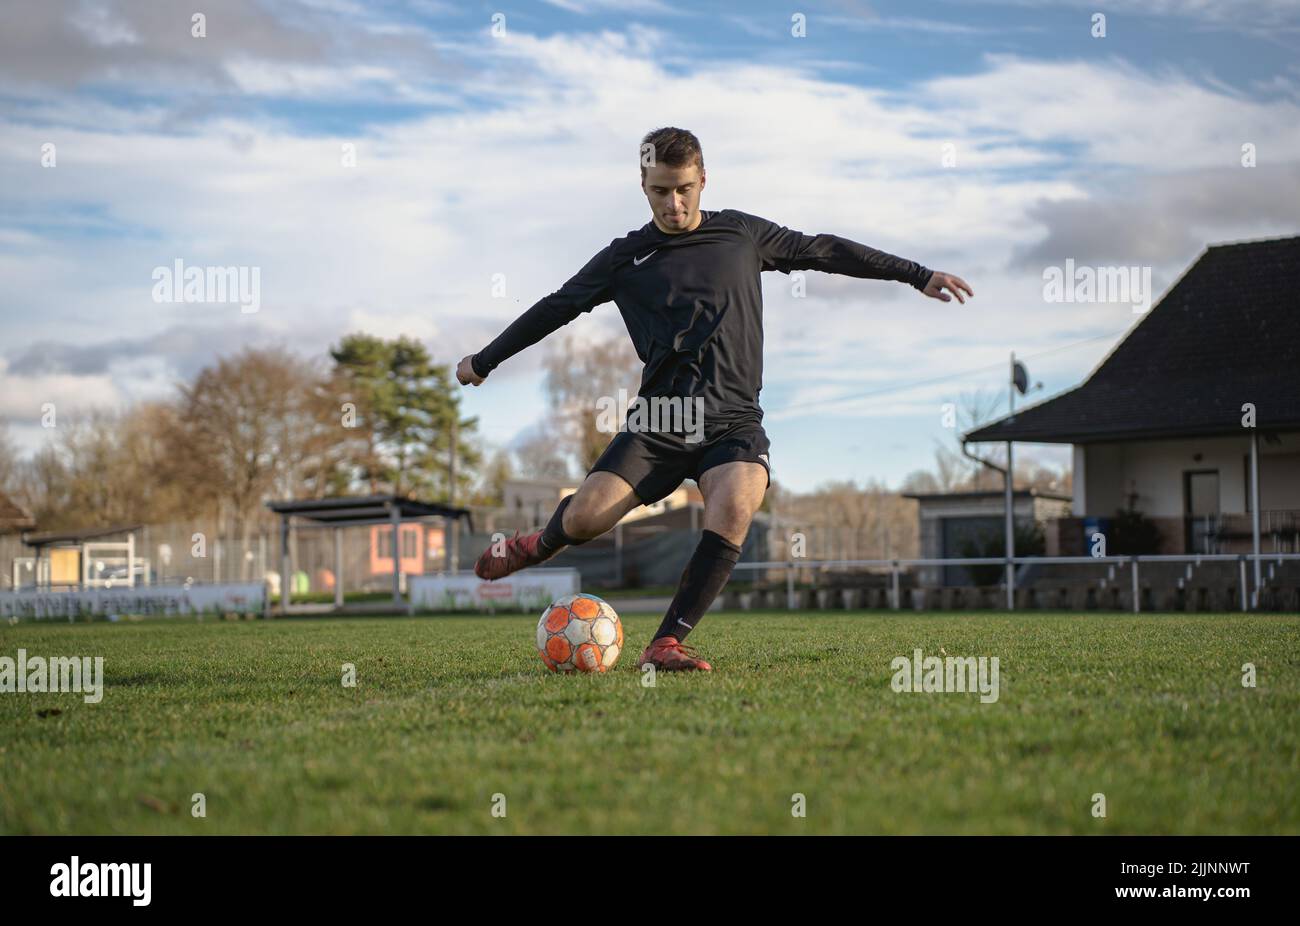 A view of the German soccer player kicking the ball in the field Stock Photo